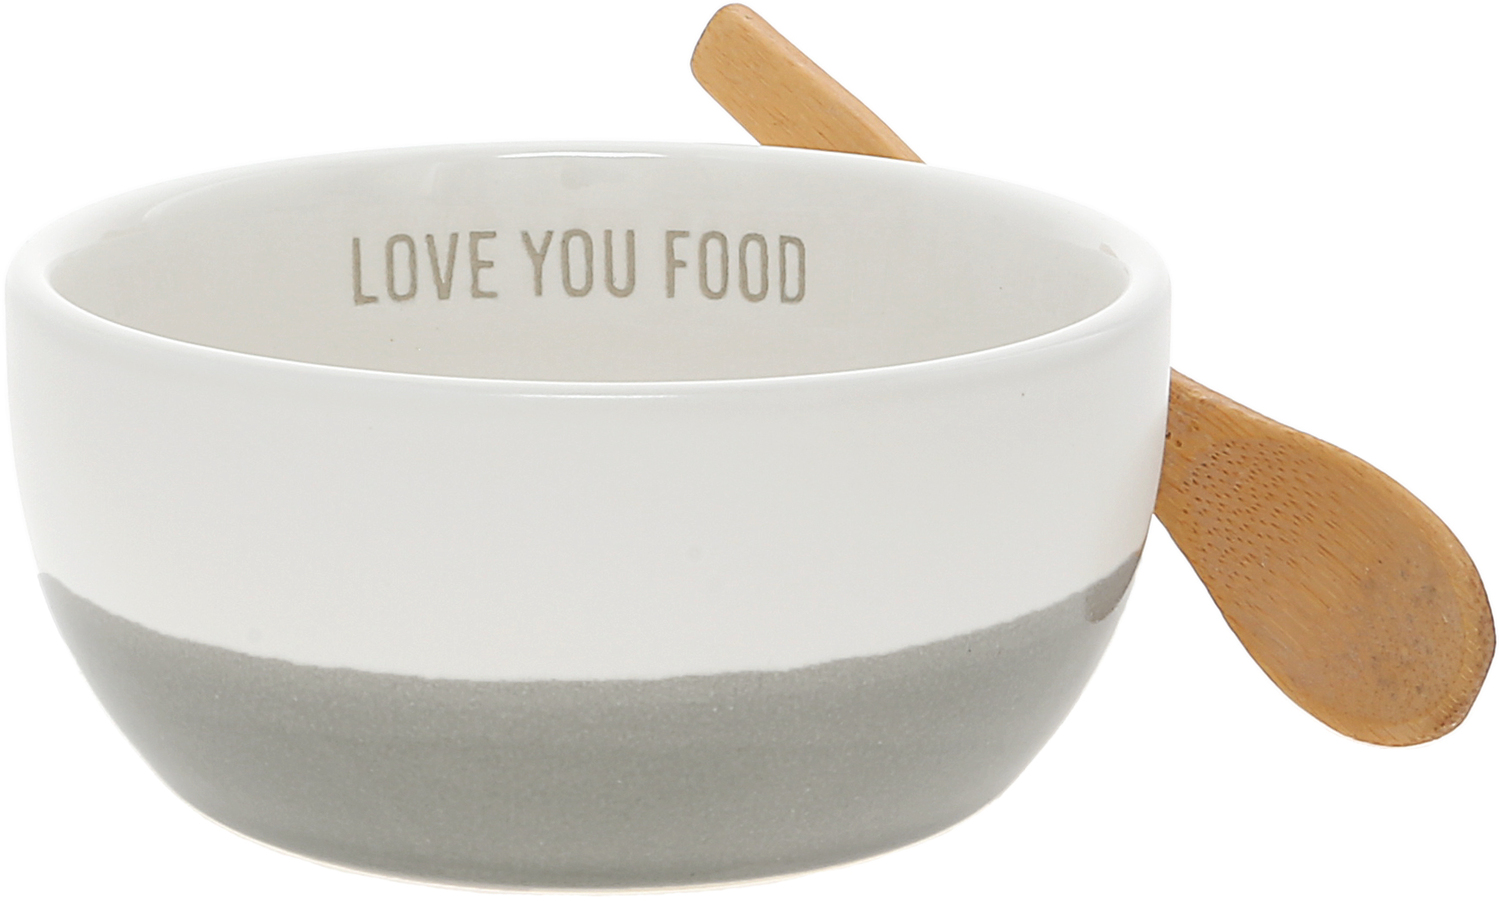 Love You Food by Love You - Love You Food - 4.5" Ceramic Bowl with Bamboo Spoon